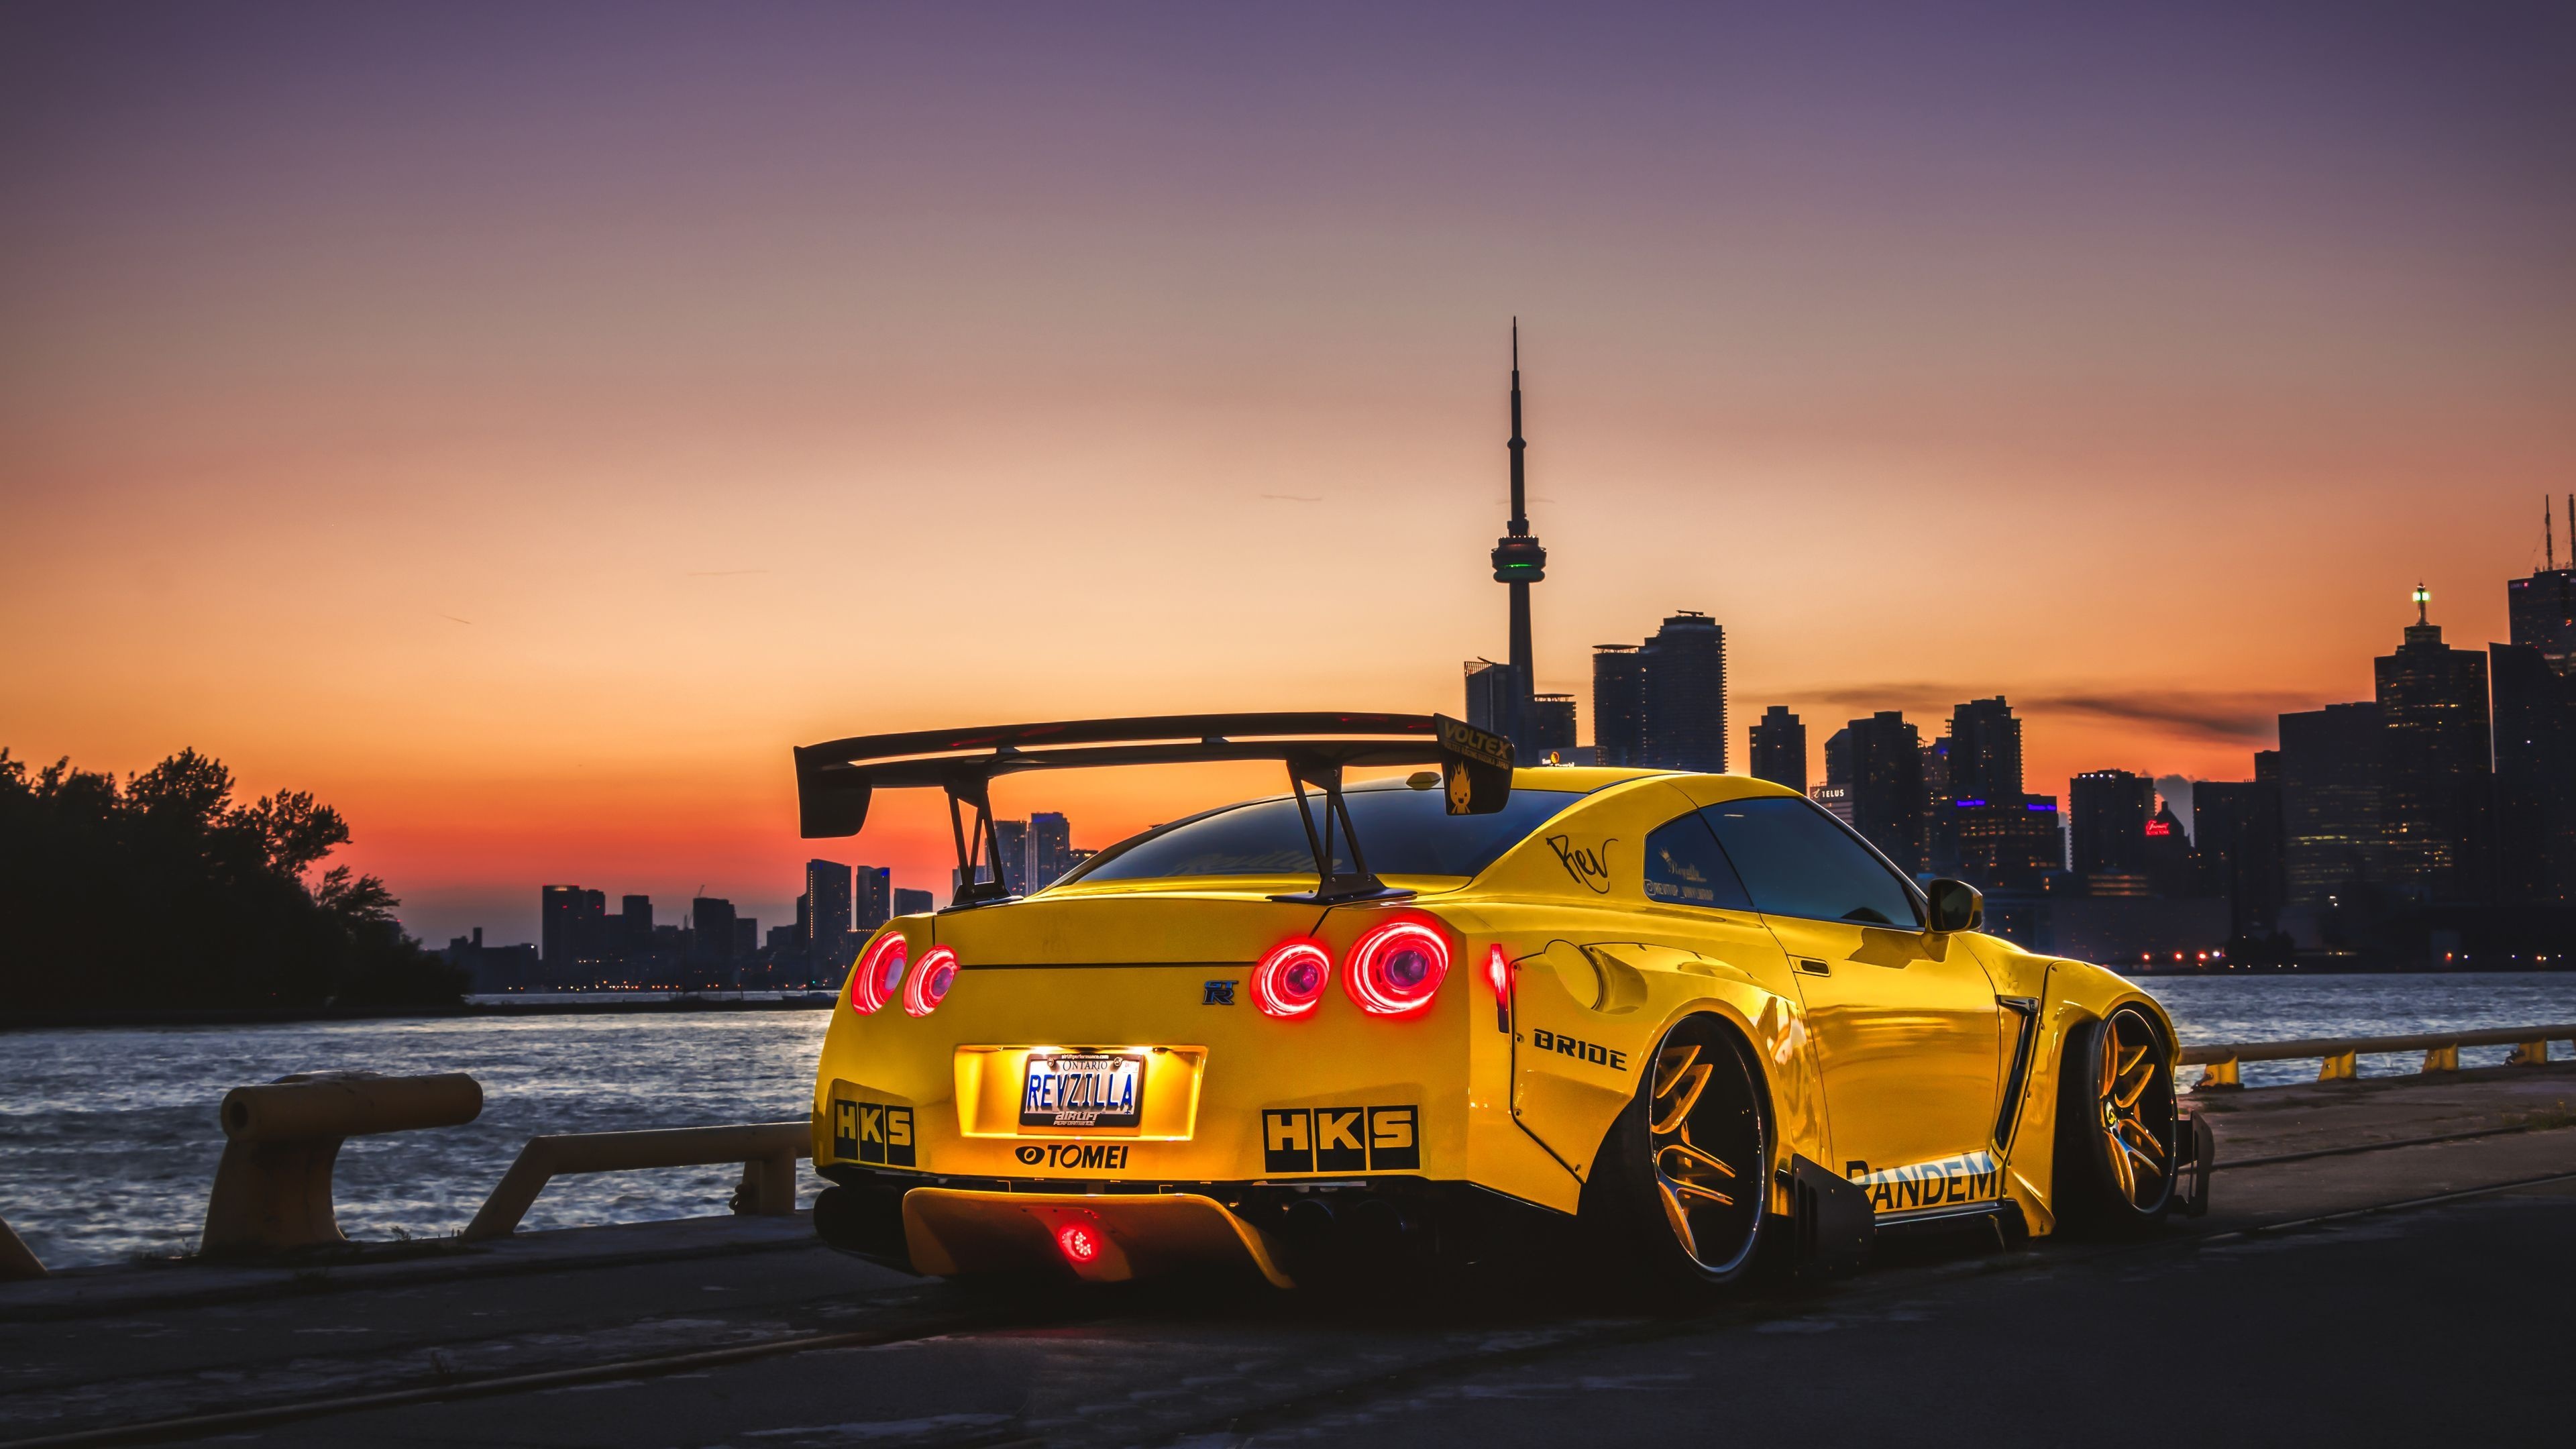 GT-R sports car, Fast and furious, Speed machine, Car enthusiasts, 3840x2160 4K Desktop